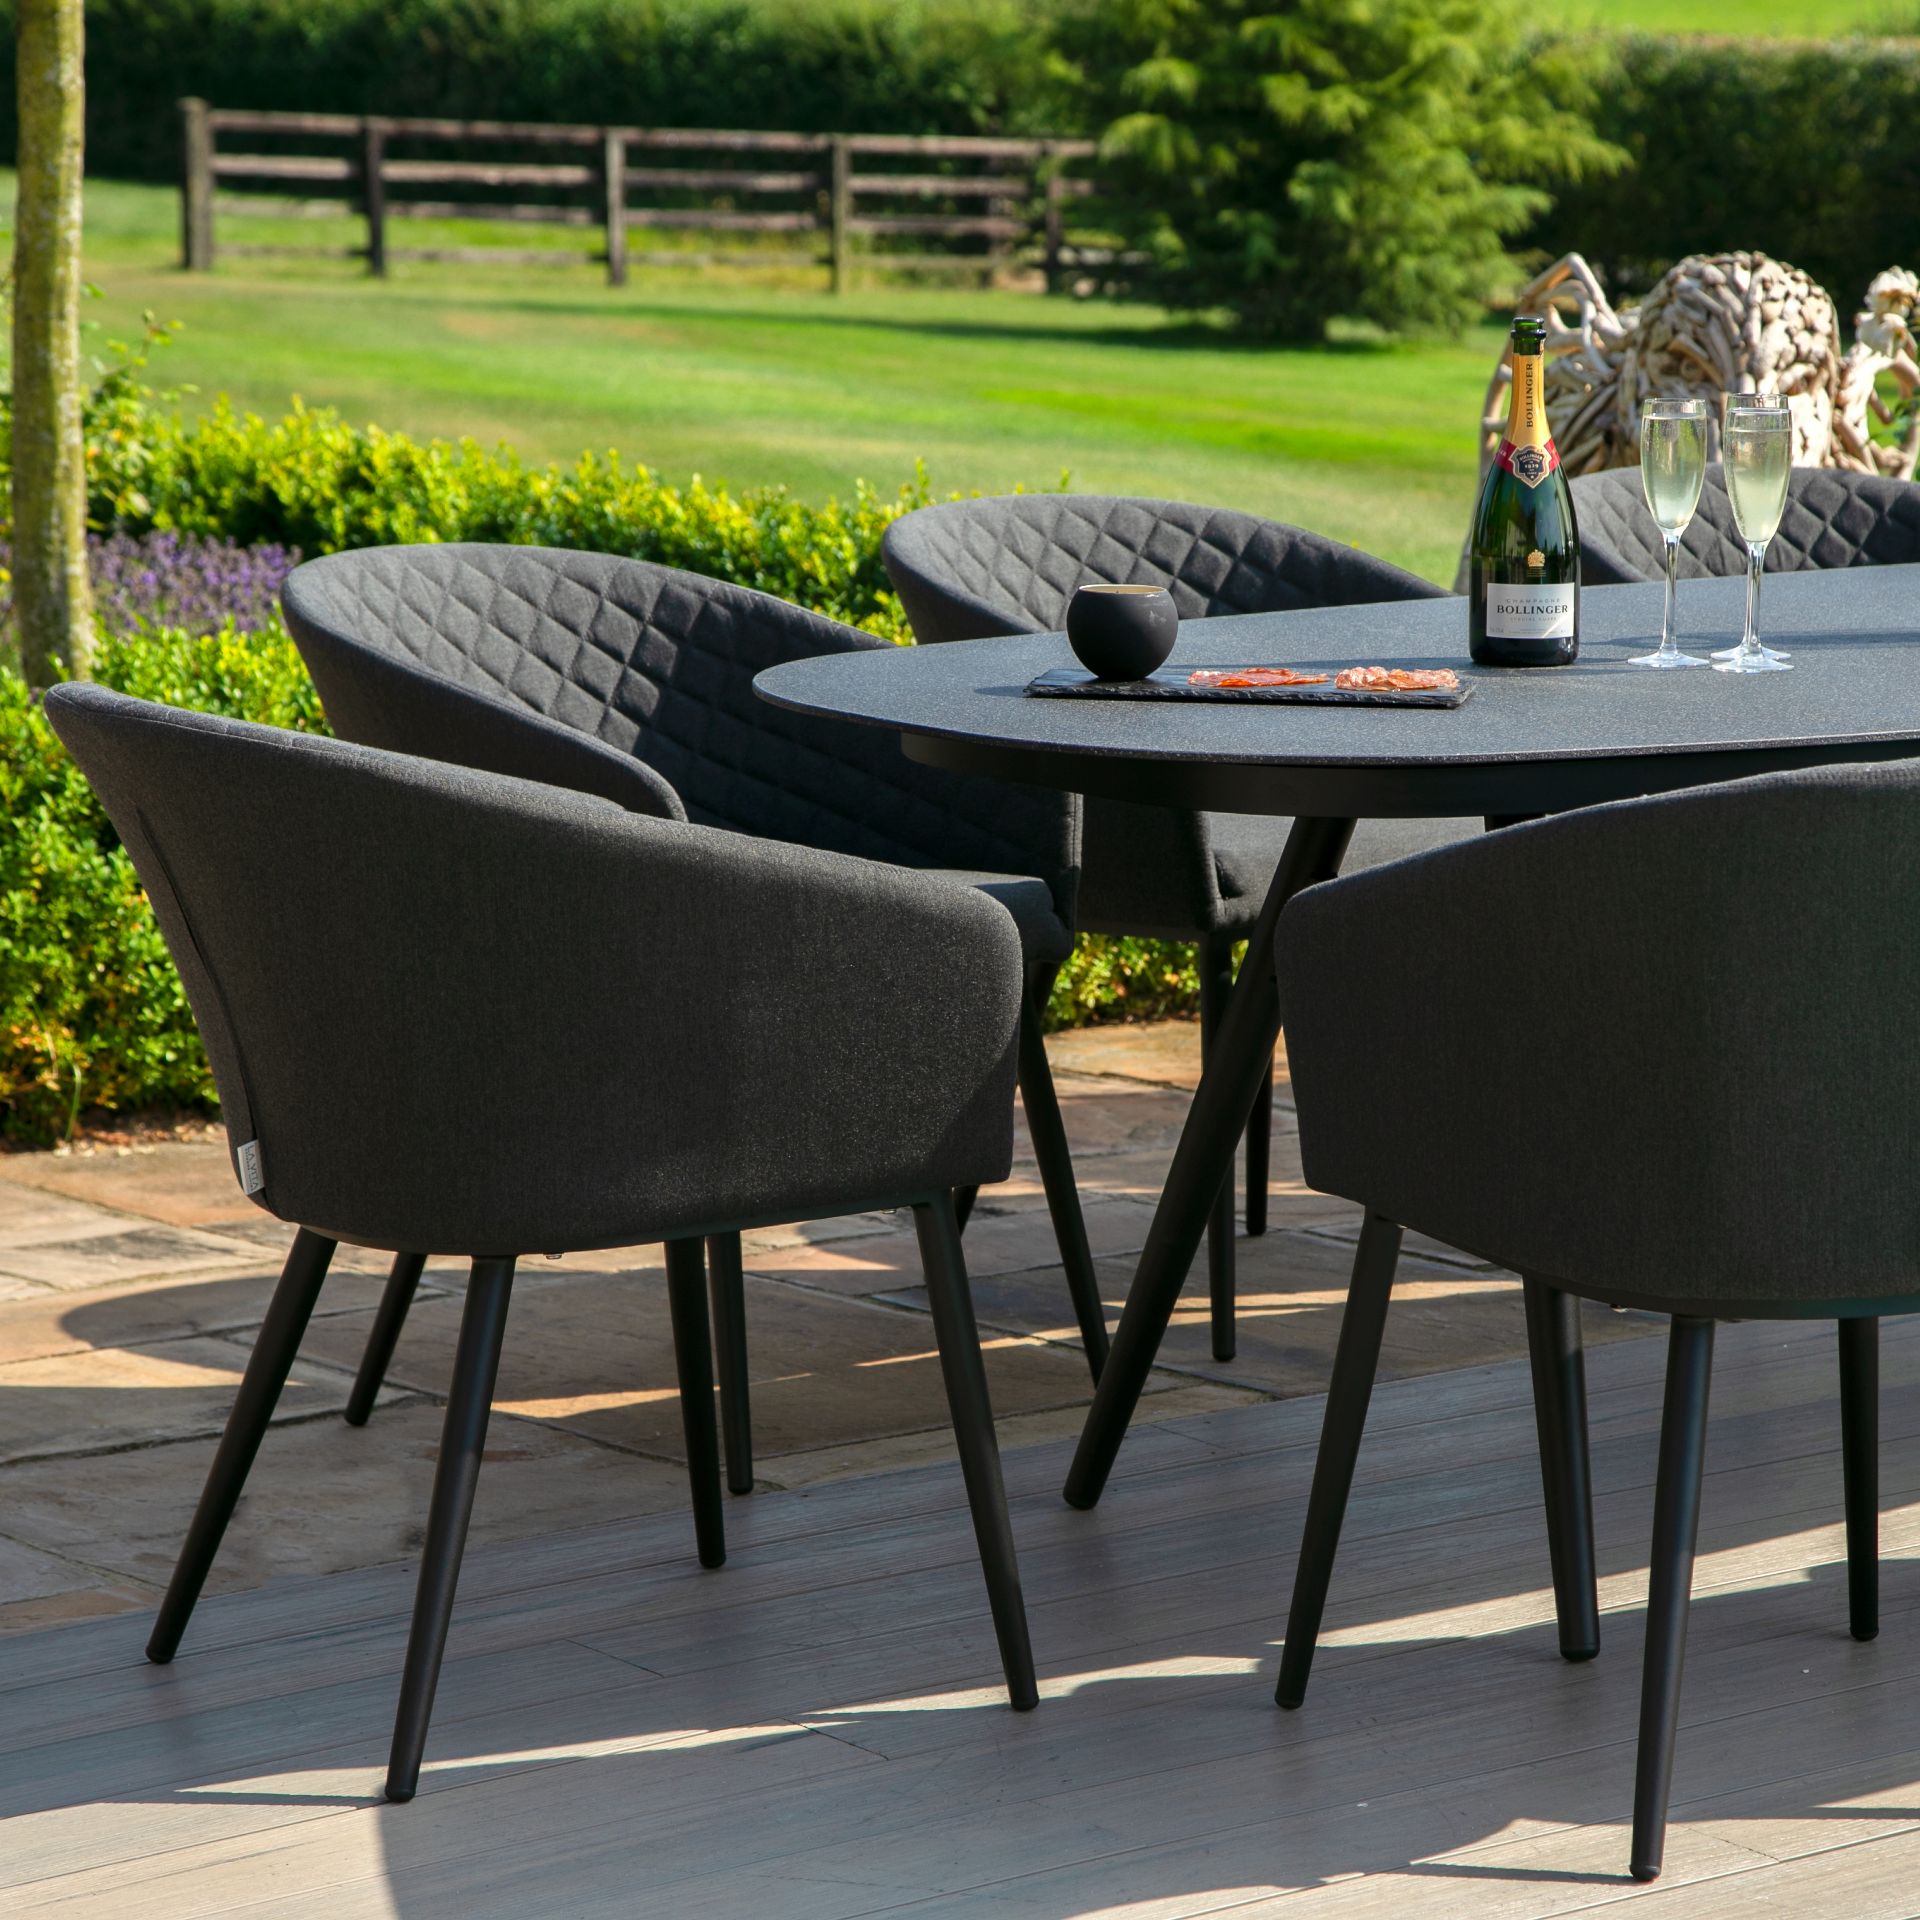 Maze Lounge - Ambition 8 Seat Oval Outdoor/Garden Dining Set (Charcoal) *BRAND NEW* RRP £2399 - Image 4 of 6